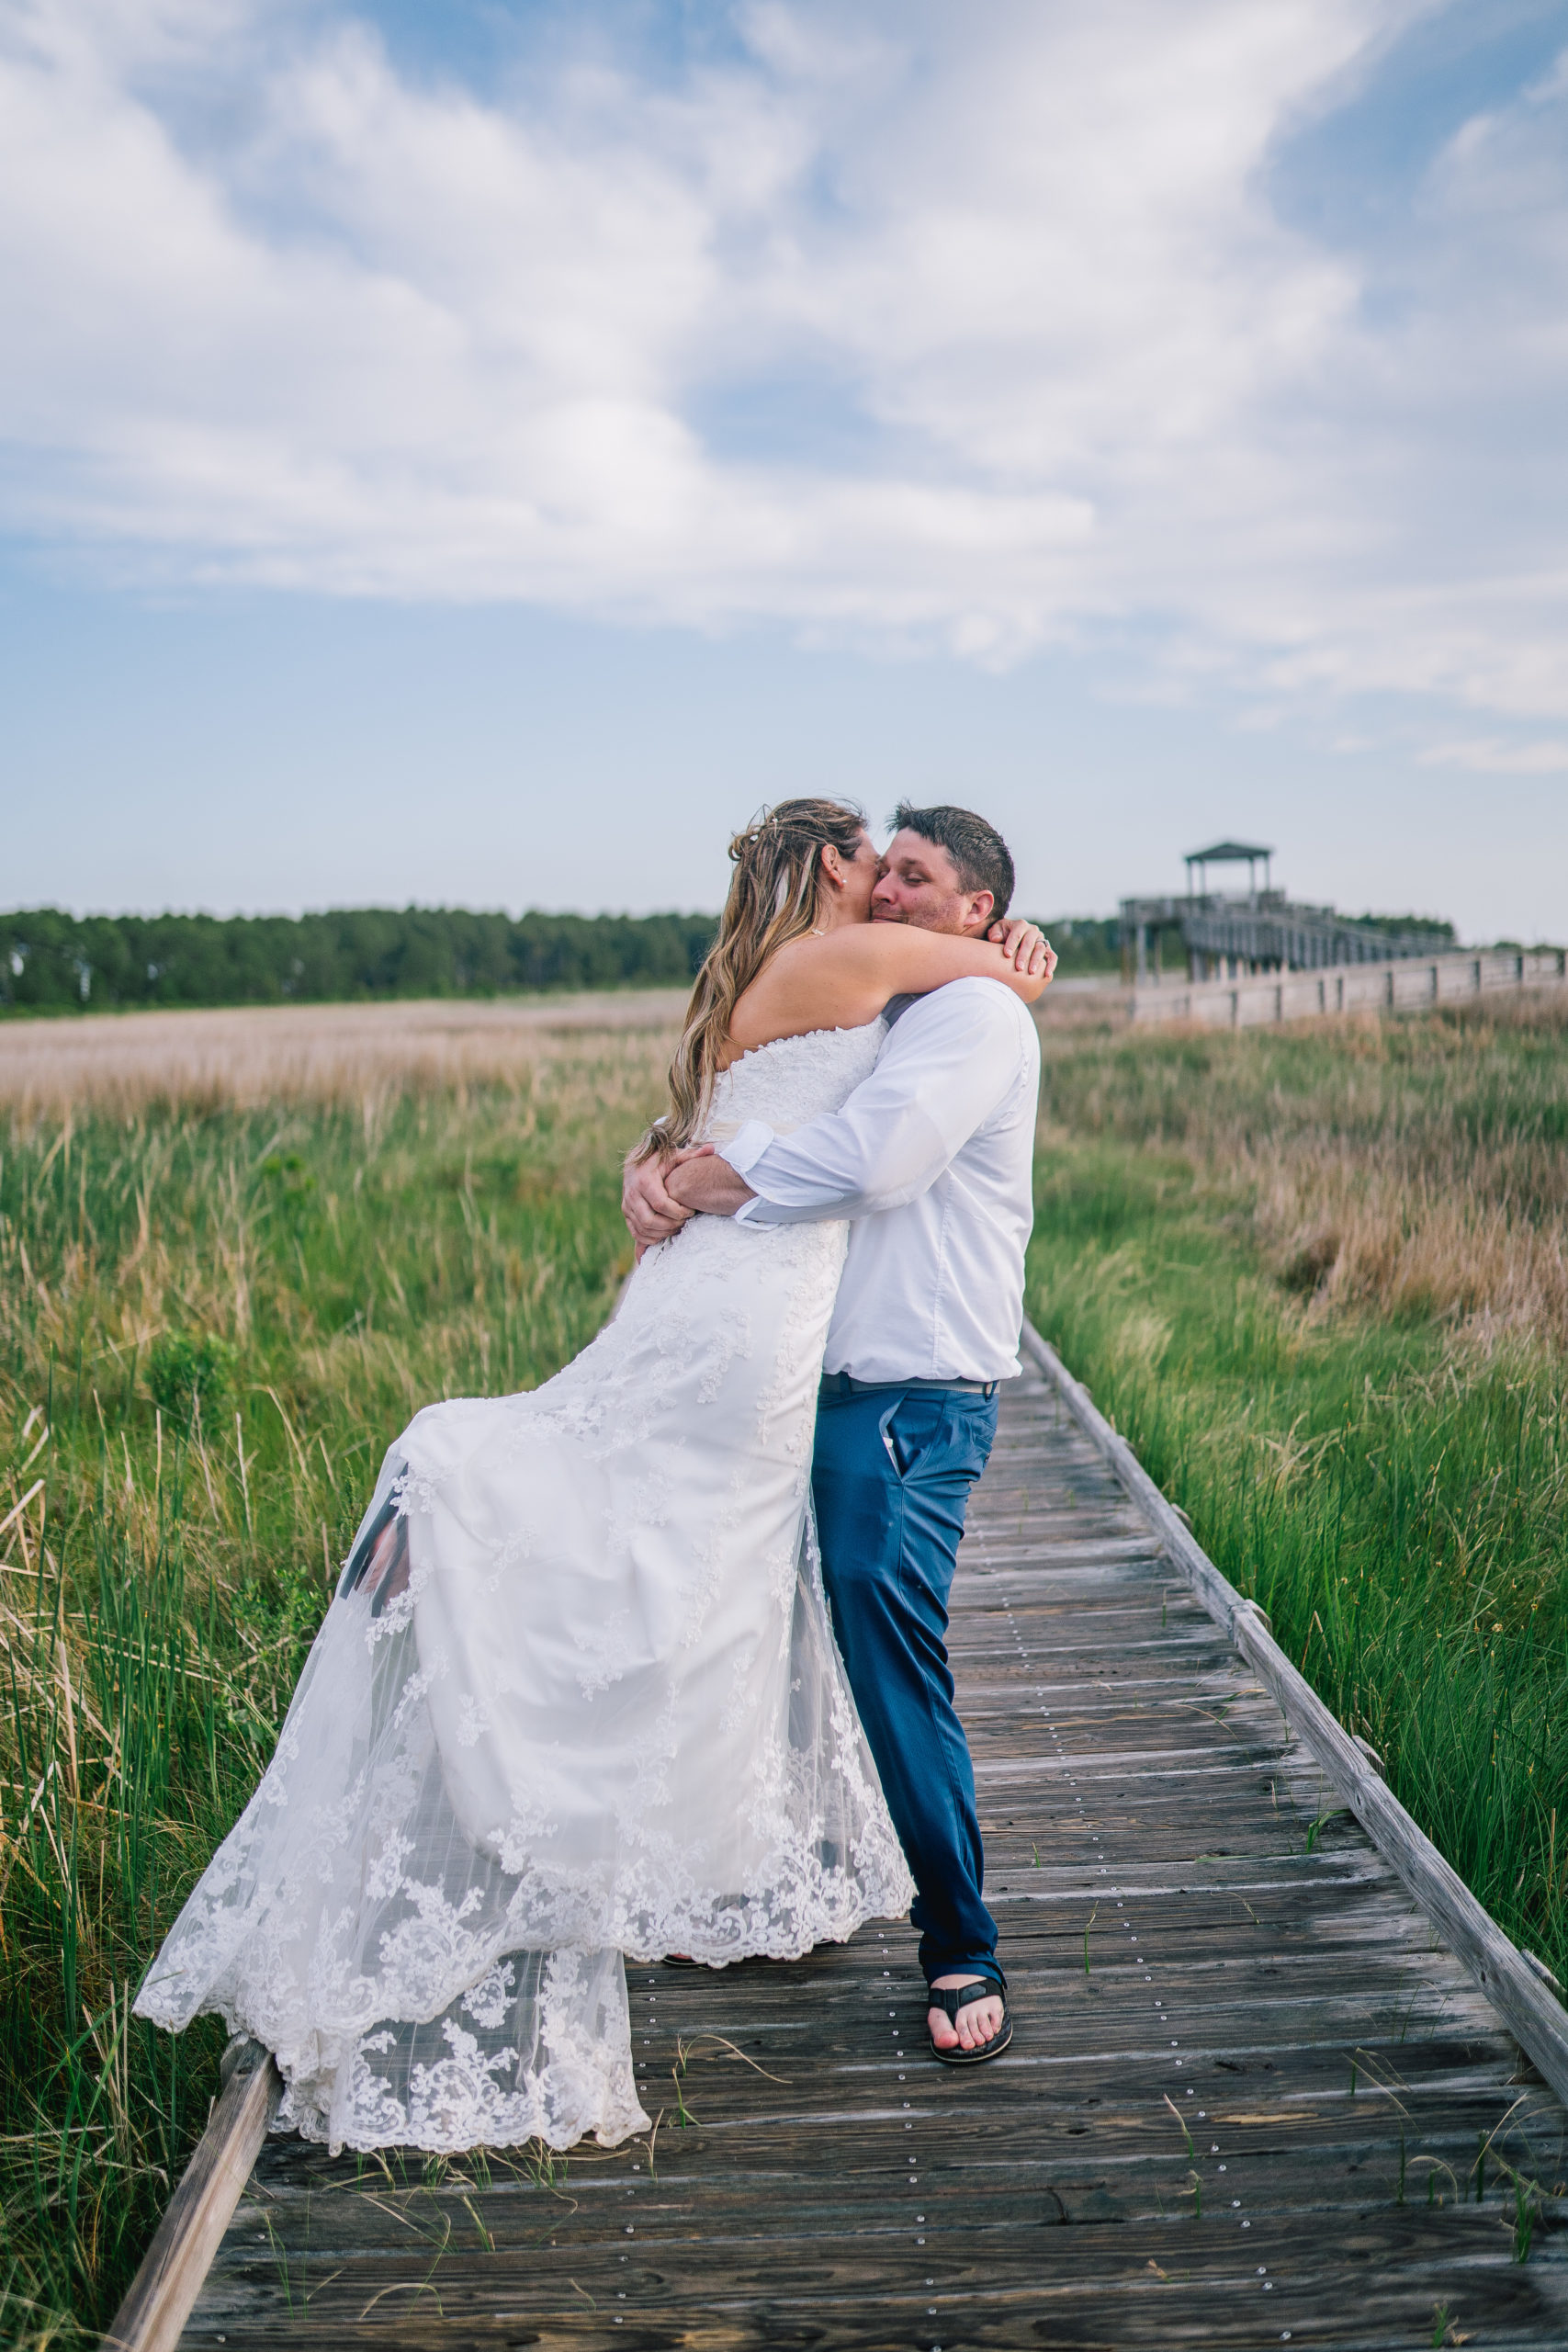 groom picking up bride on a boardwalk and spinning her around as her lace train flows through the air